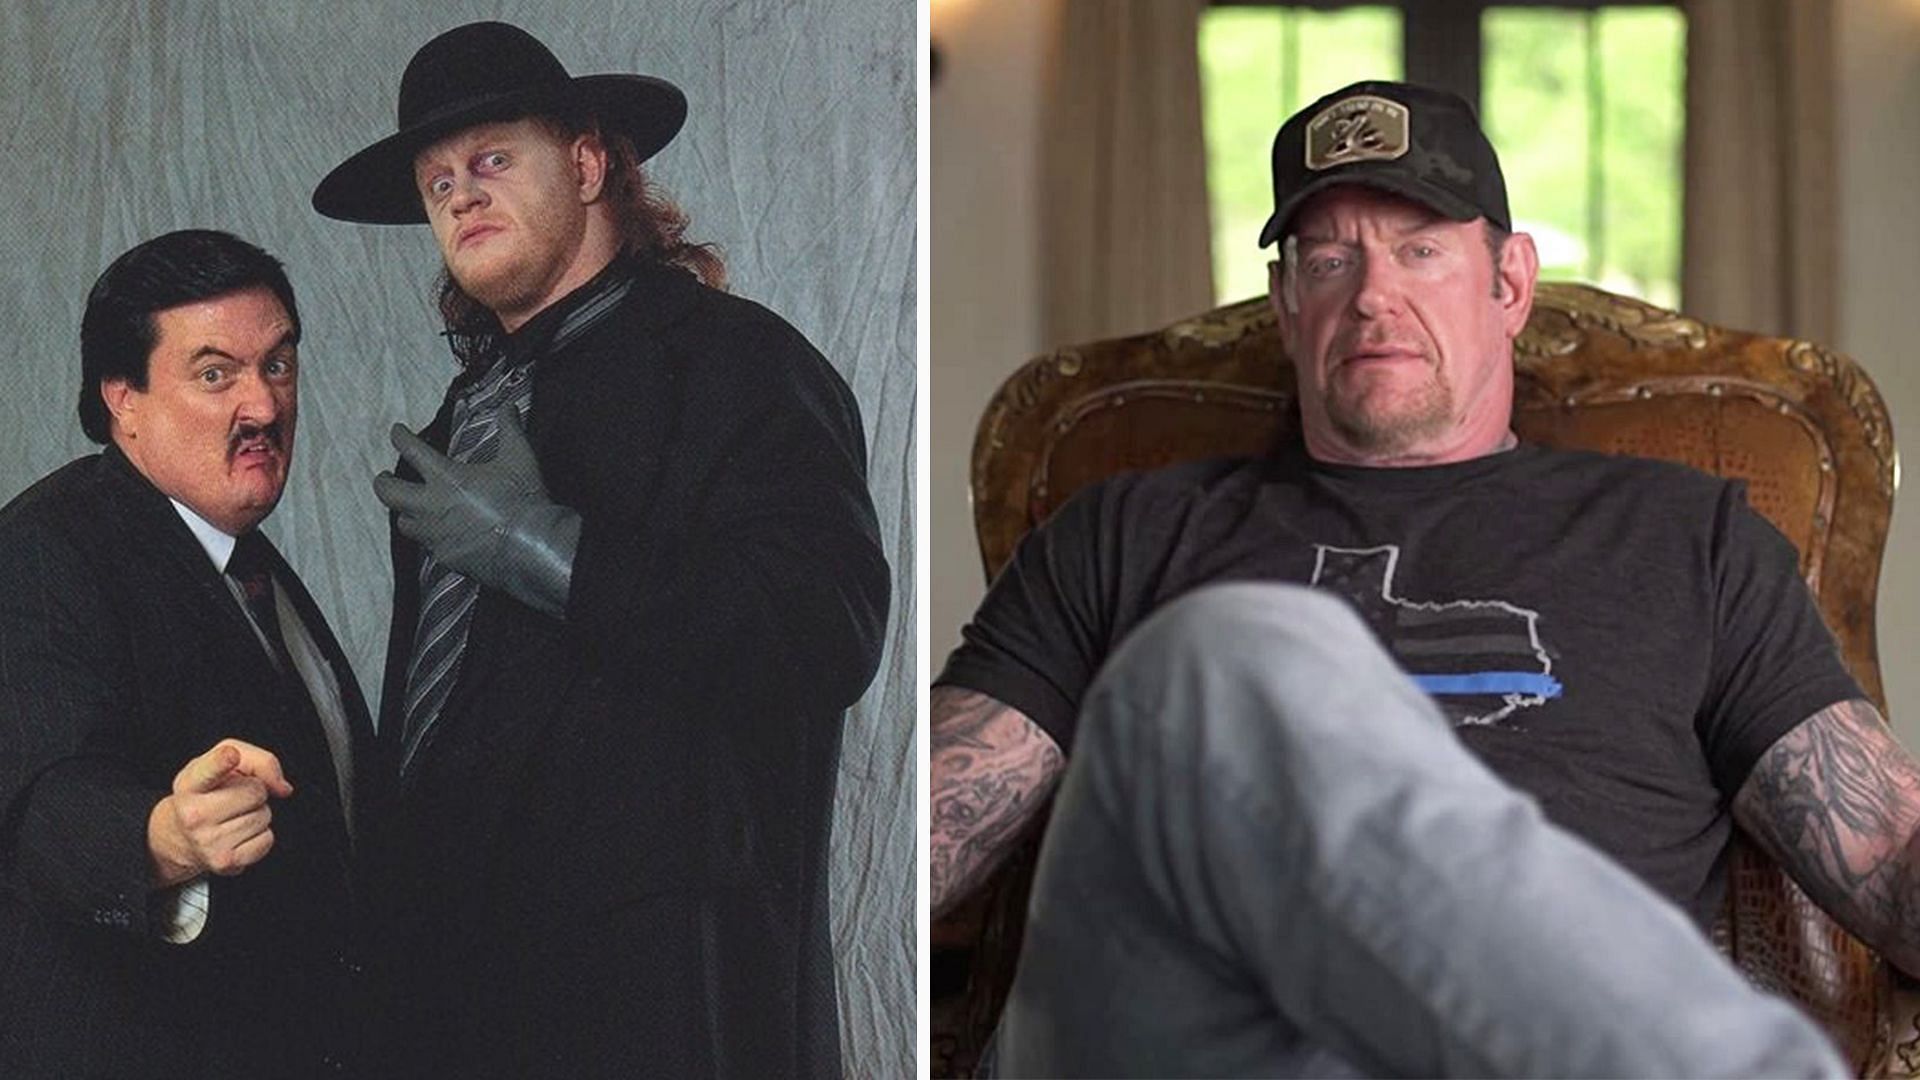 The Undertaker and Paul Bearer were one of the most interesting characters of WWE